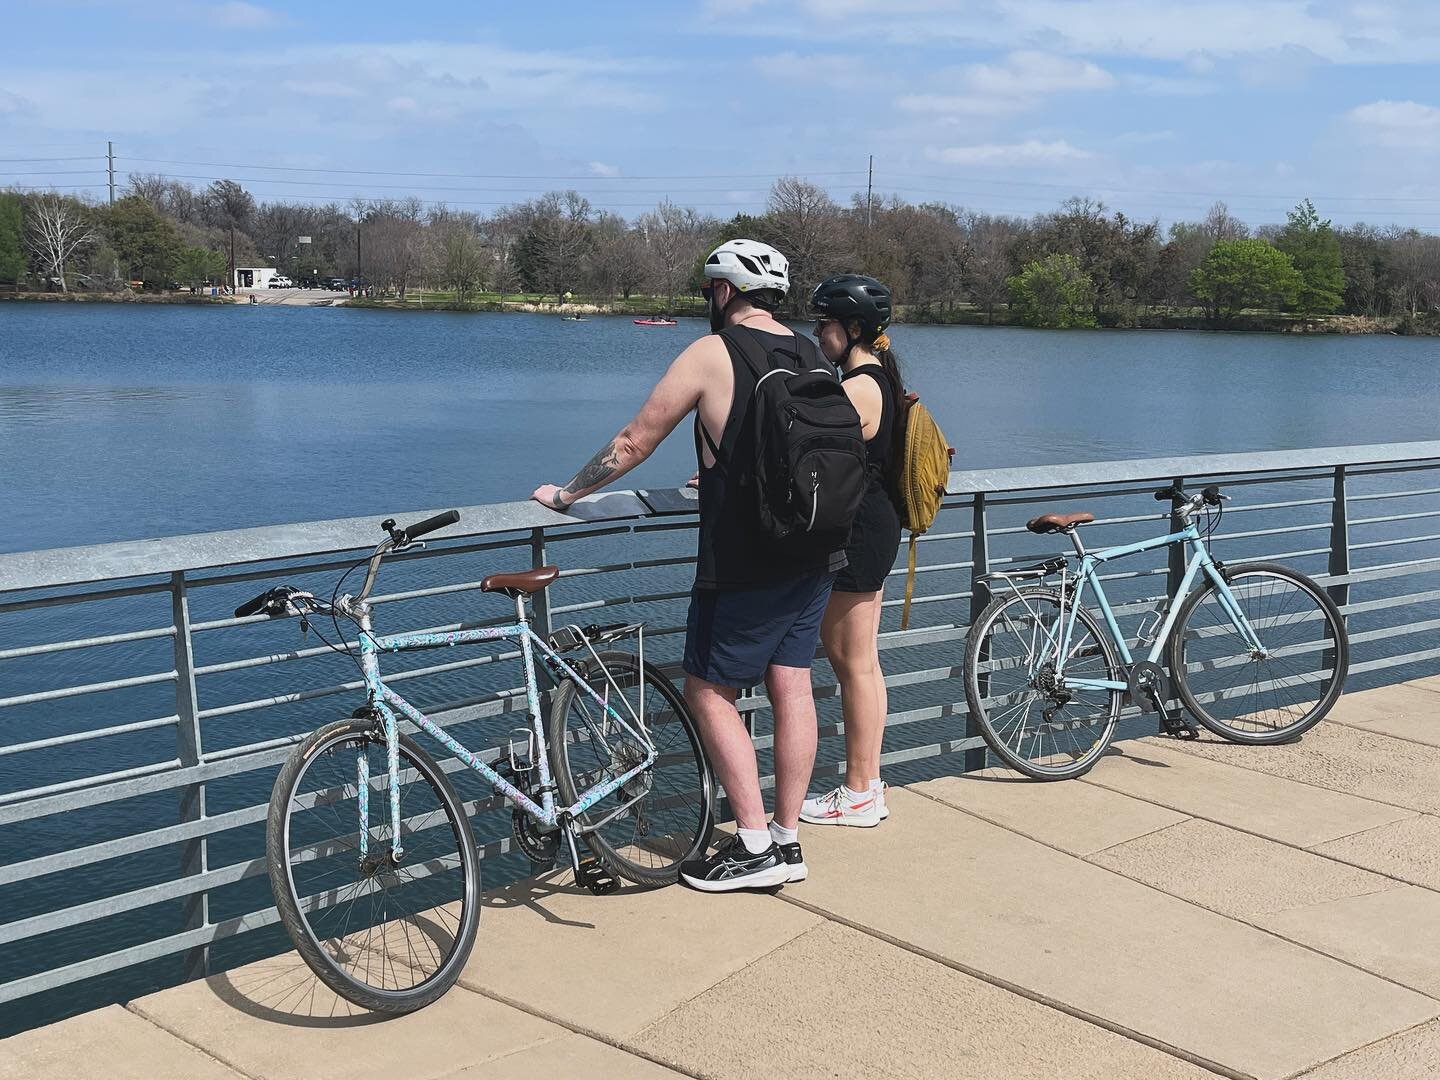 Love when I come across folks using our bikes, taking in the beauty of Austin on such a gorgeous day!
#austinbikelife #getoutside